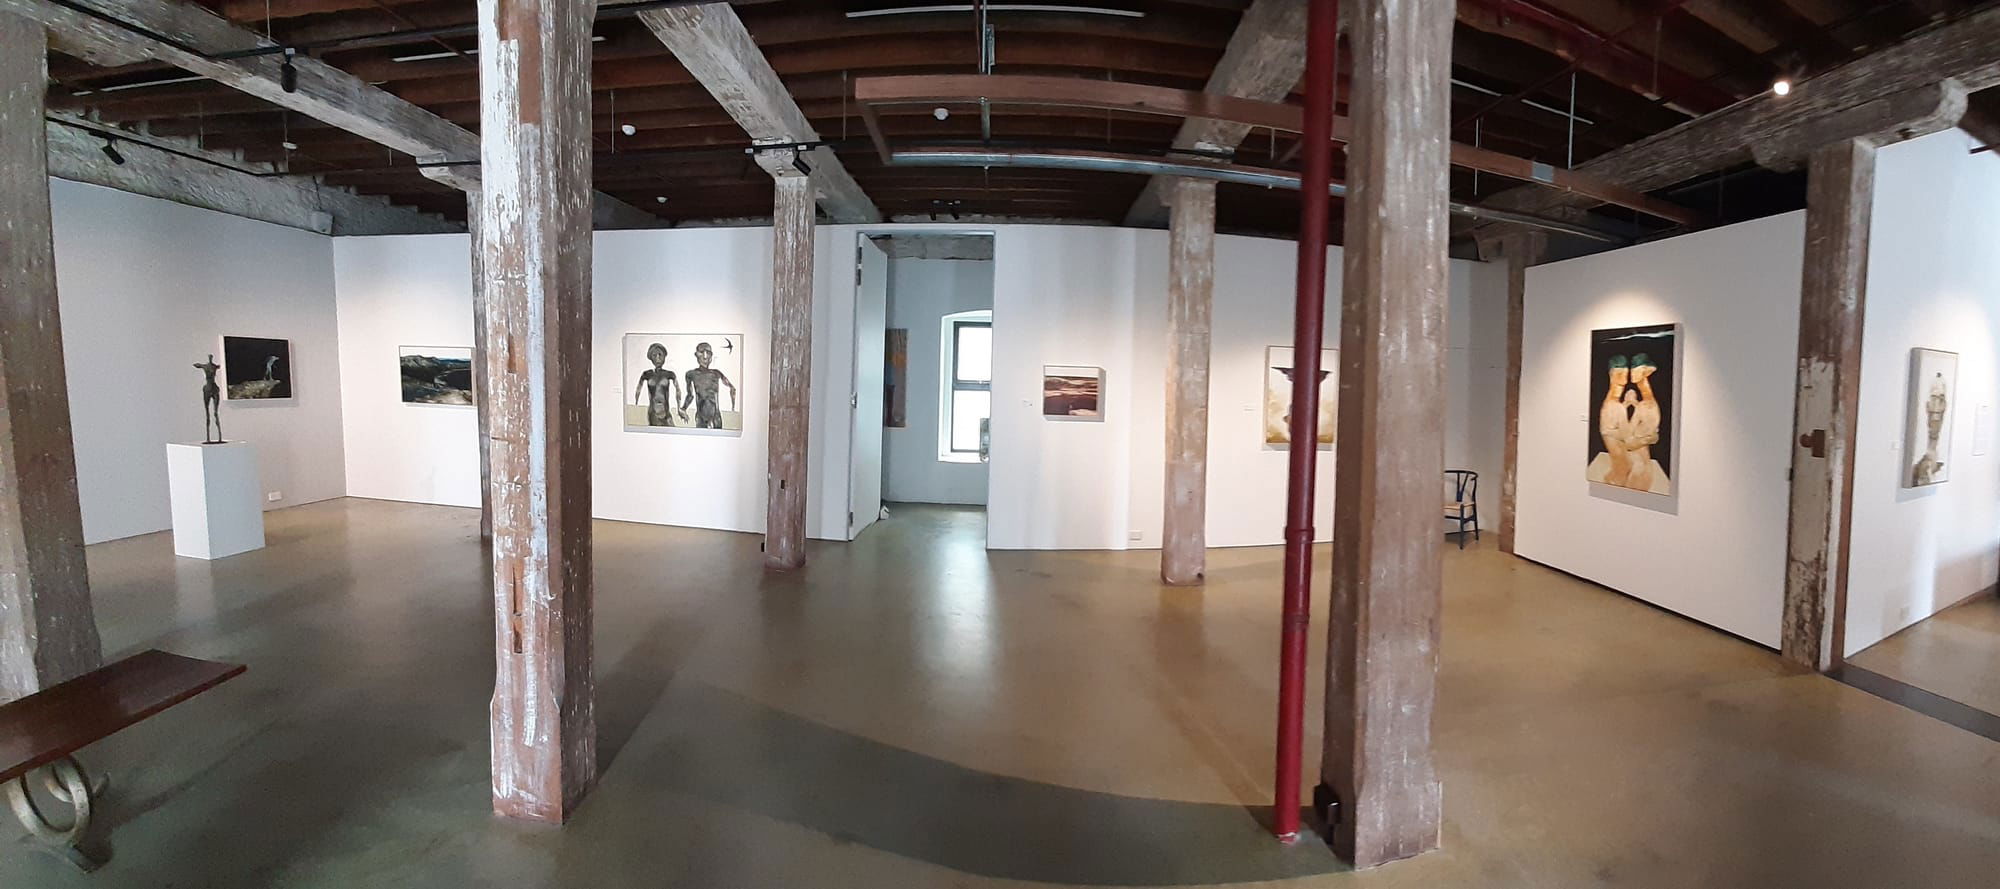 Gallery View 2020